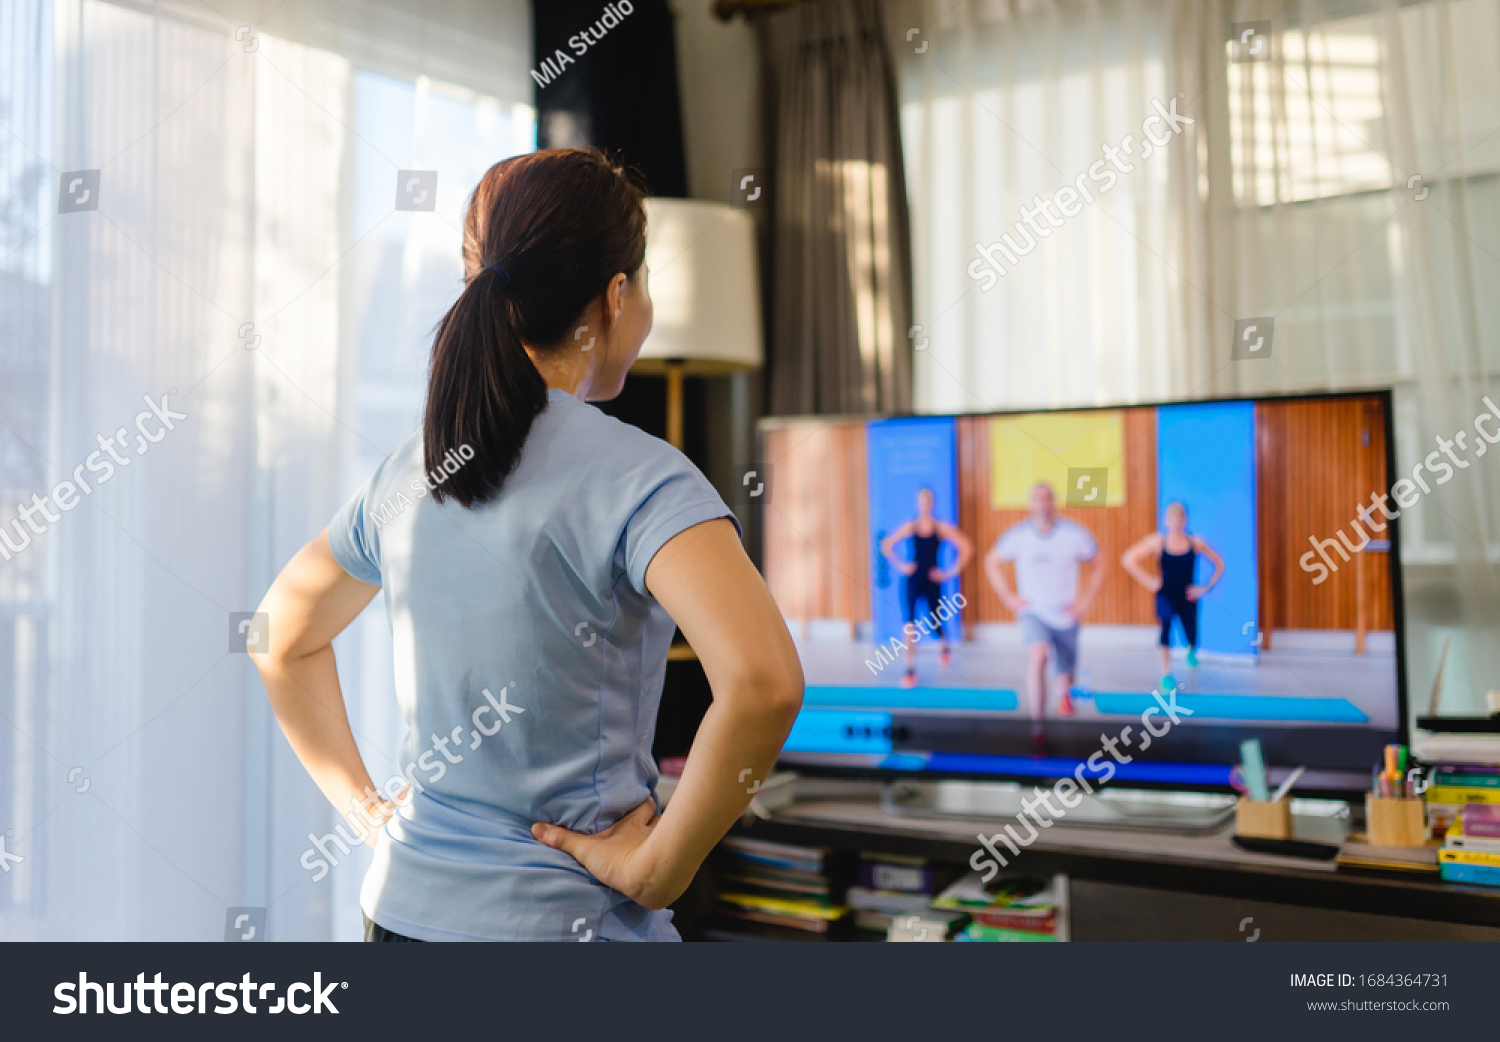 Video streaming Stay home.home fitness workout class live streaming online.Asian woman doing strength training cardio aerobic dance exercises watching videos on a smart tv in the living room at home.